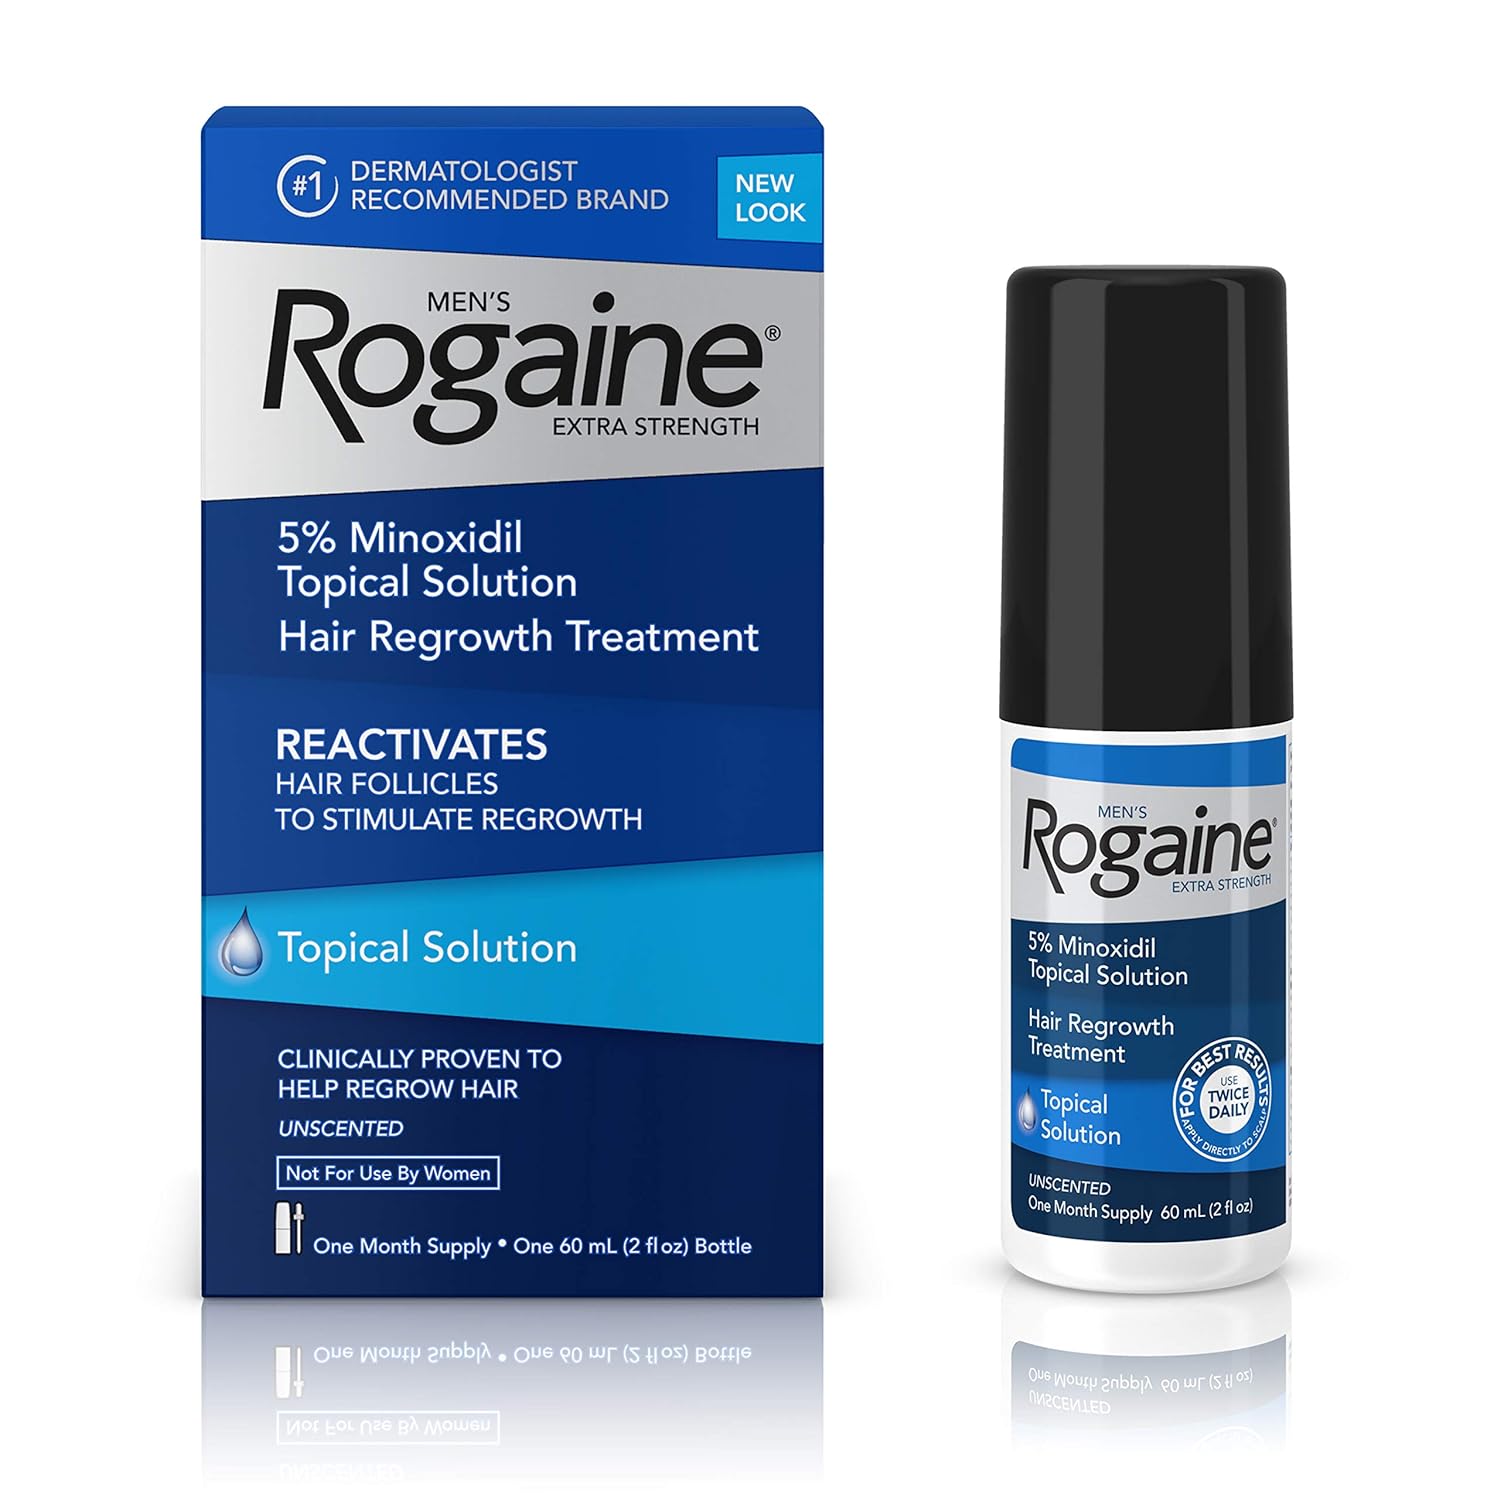 Men's Rogaine Extra Strength 5% Minoxidil Topical Solut